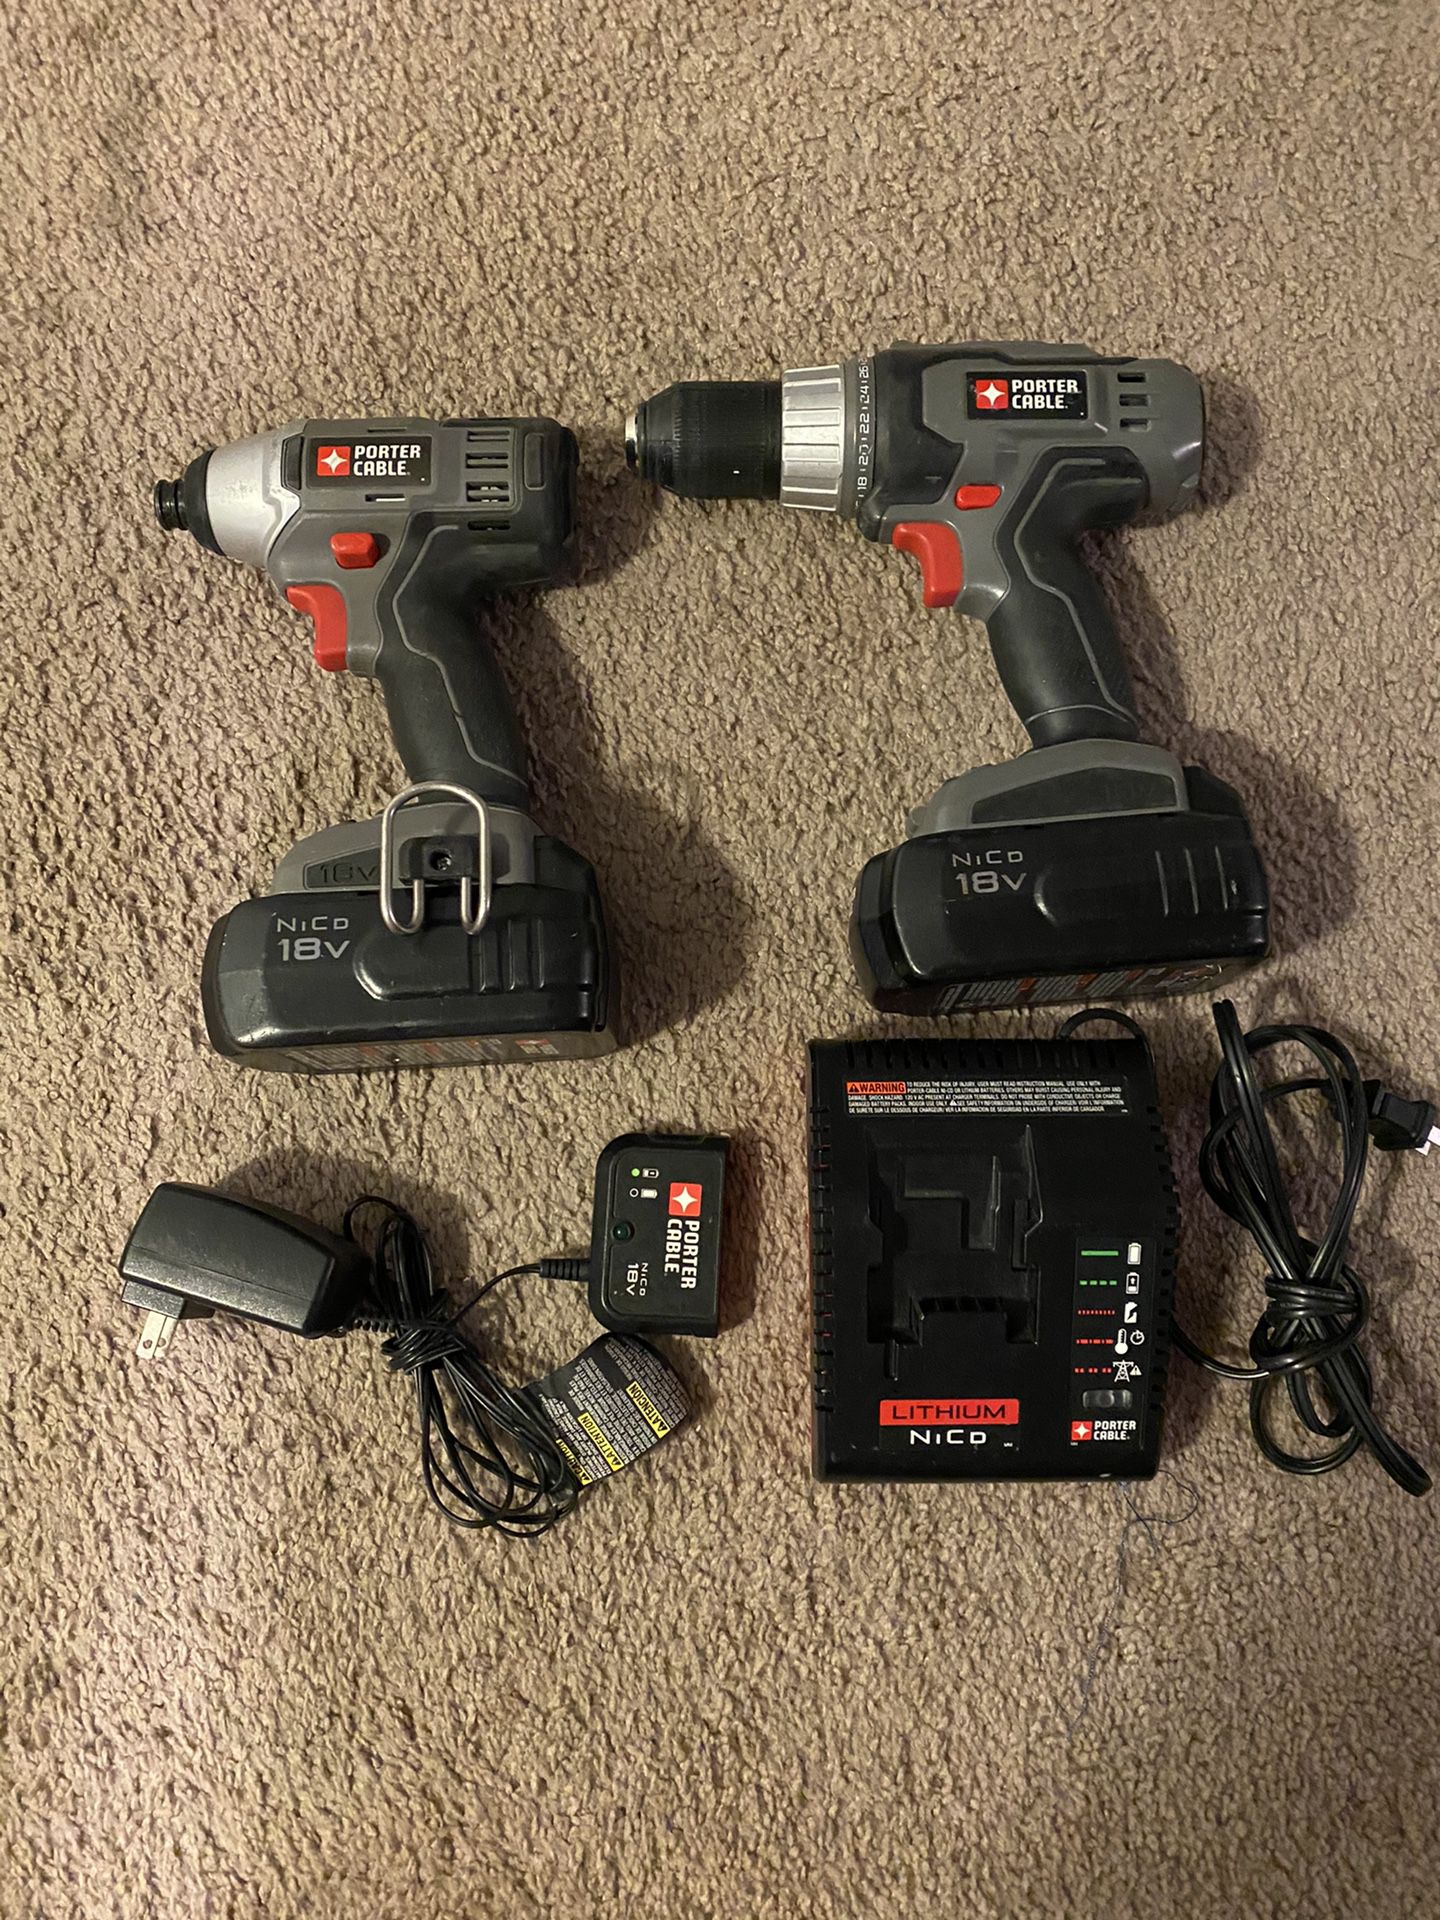 Drill & impact gun with 2 batteries & 2 chargers